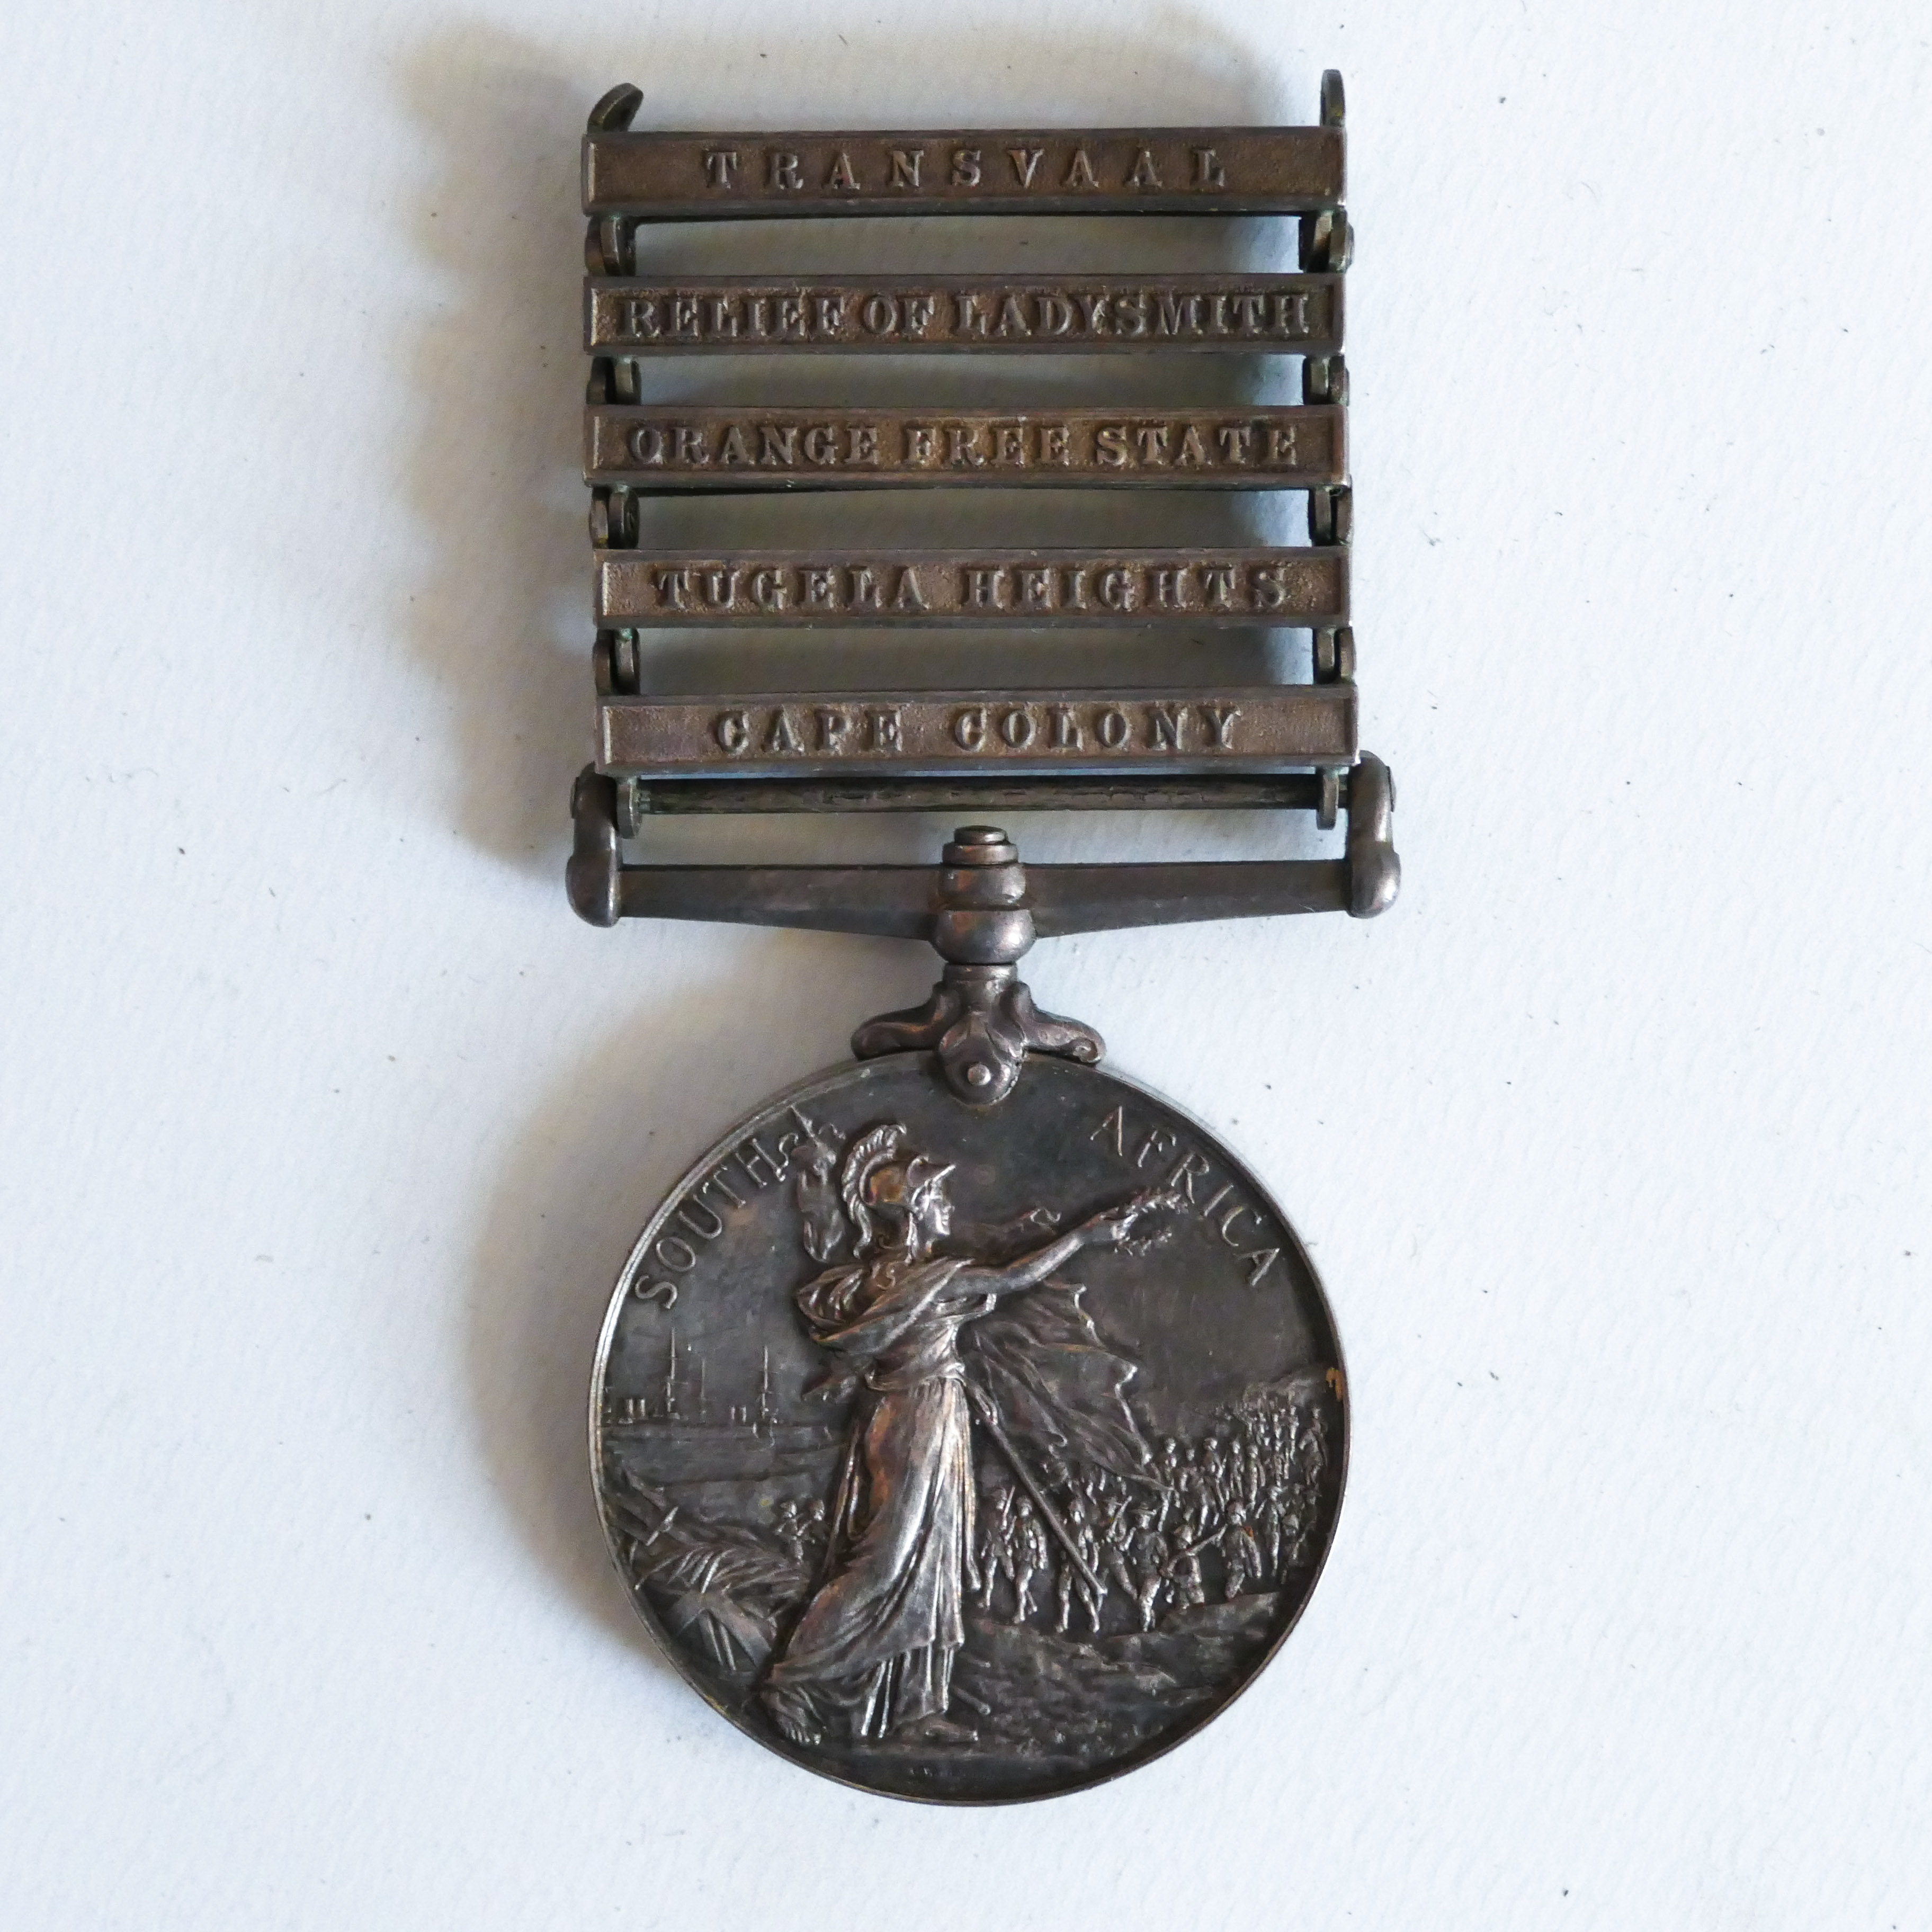 BRITISH EMPIRE BOER WAR MEDAL FIVE CLASPS SOUTH AFRICA QUEEN VICTORIA HISTORICAL MILITARY